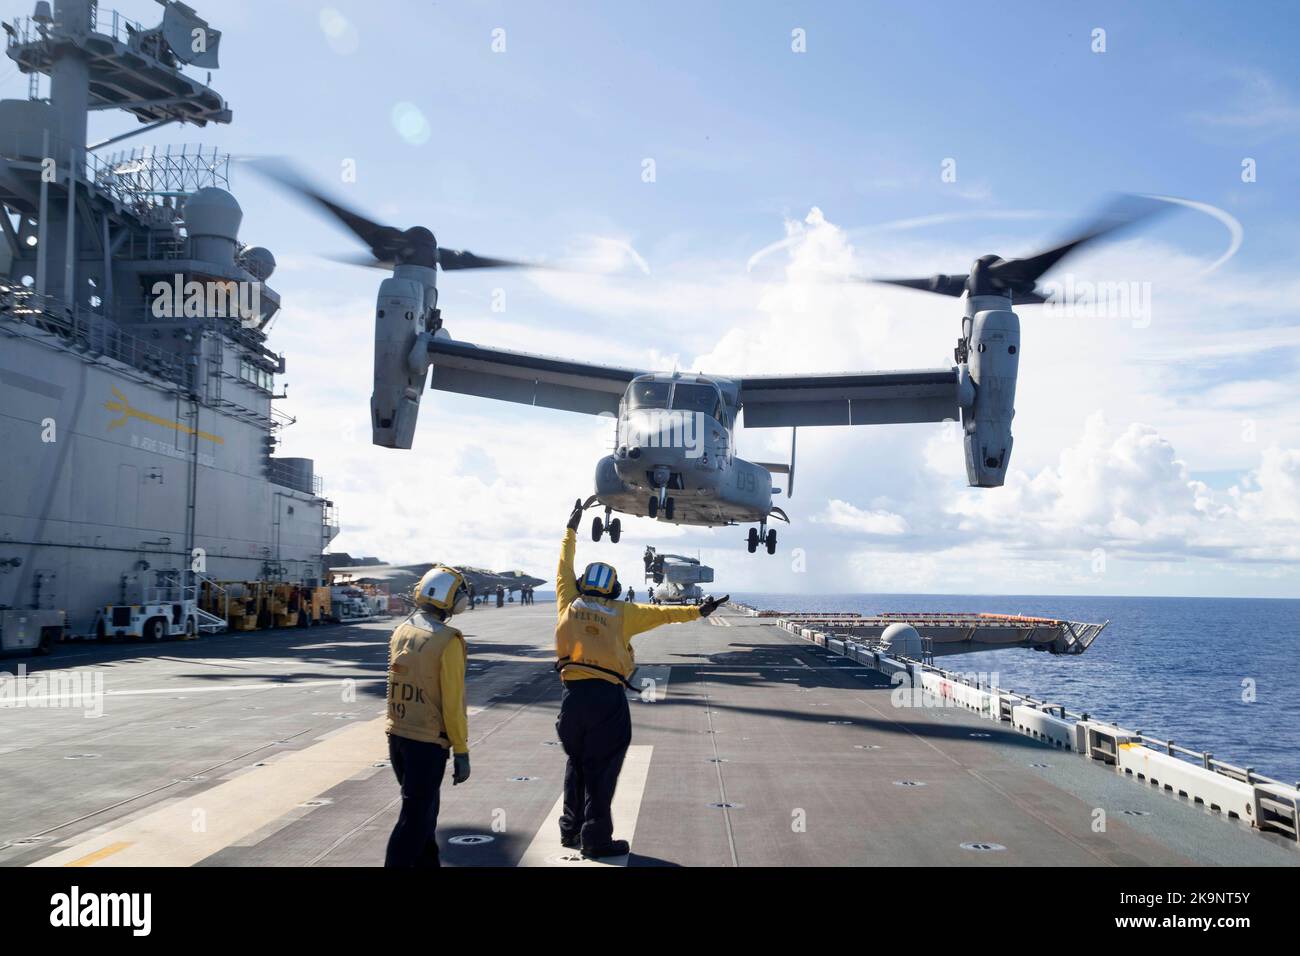 An MV-22 Osprey tiltrotor aircraft assigned to Marine Medium Tiltrotor Squadron (VMM) 262 (Reinforced) takes off from the amphibious assault ship USS Tripoli (LHA 7) Stock Photo